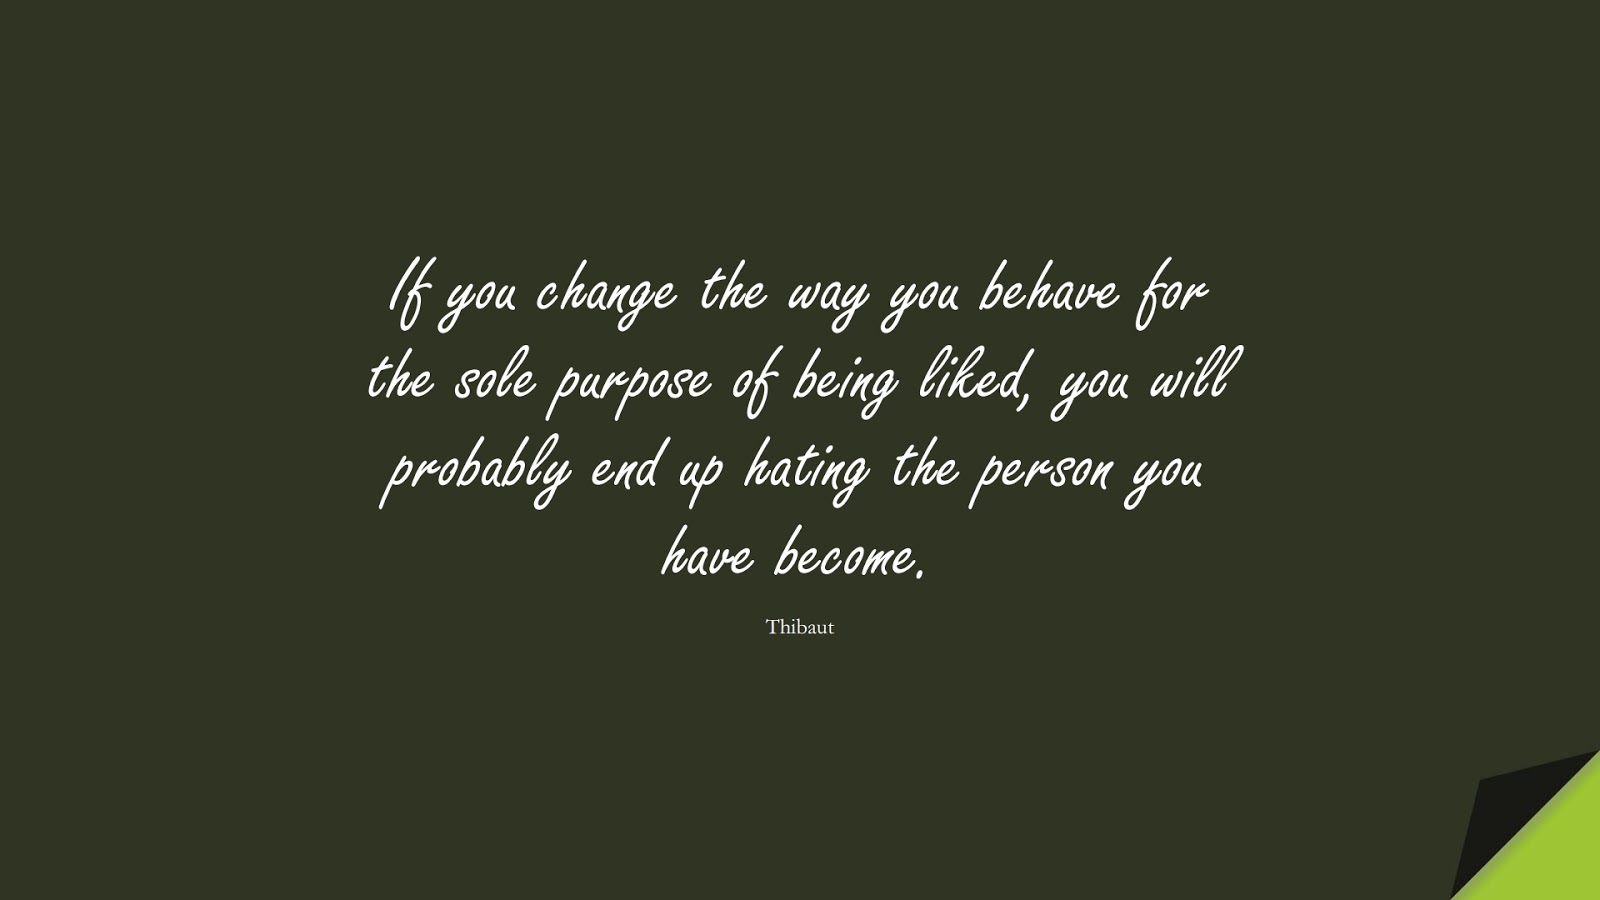 If you change the way you behave for the sole purpose of being liked, you will probably end up hating the person you have become. (Thibaut);  #BeYourselfQuotes